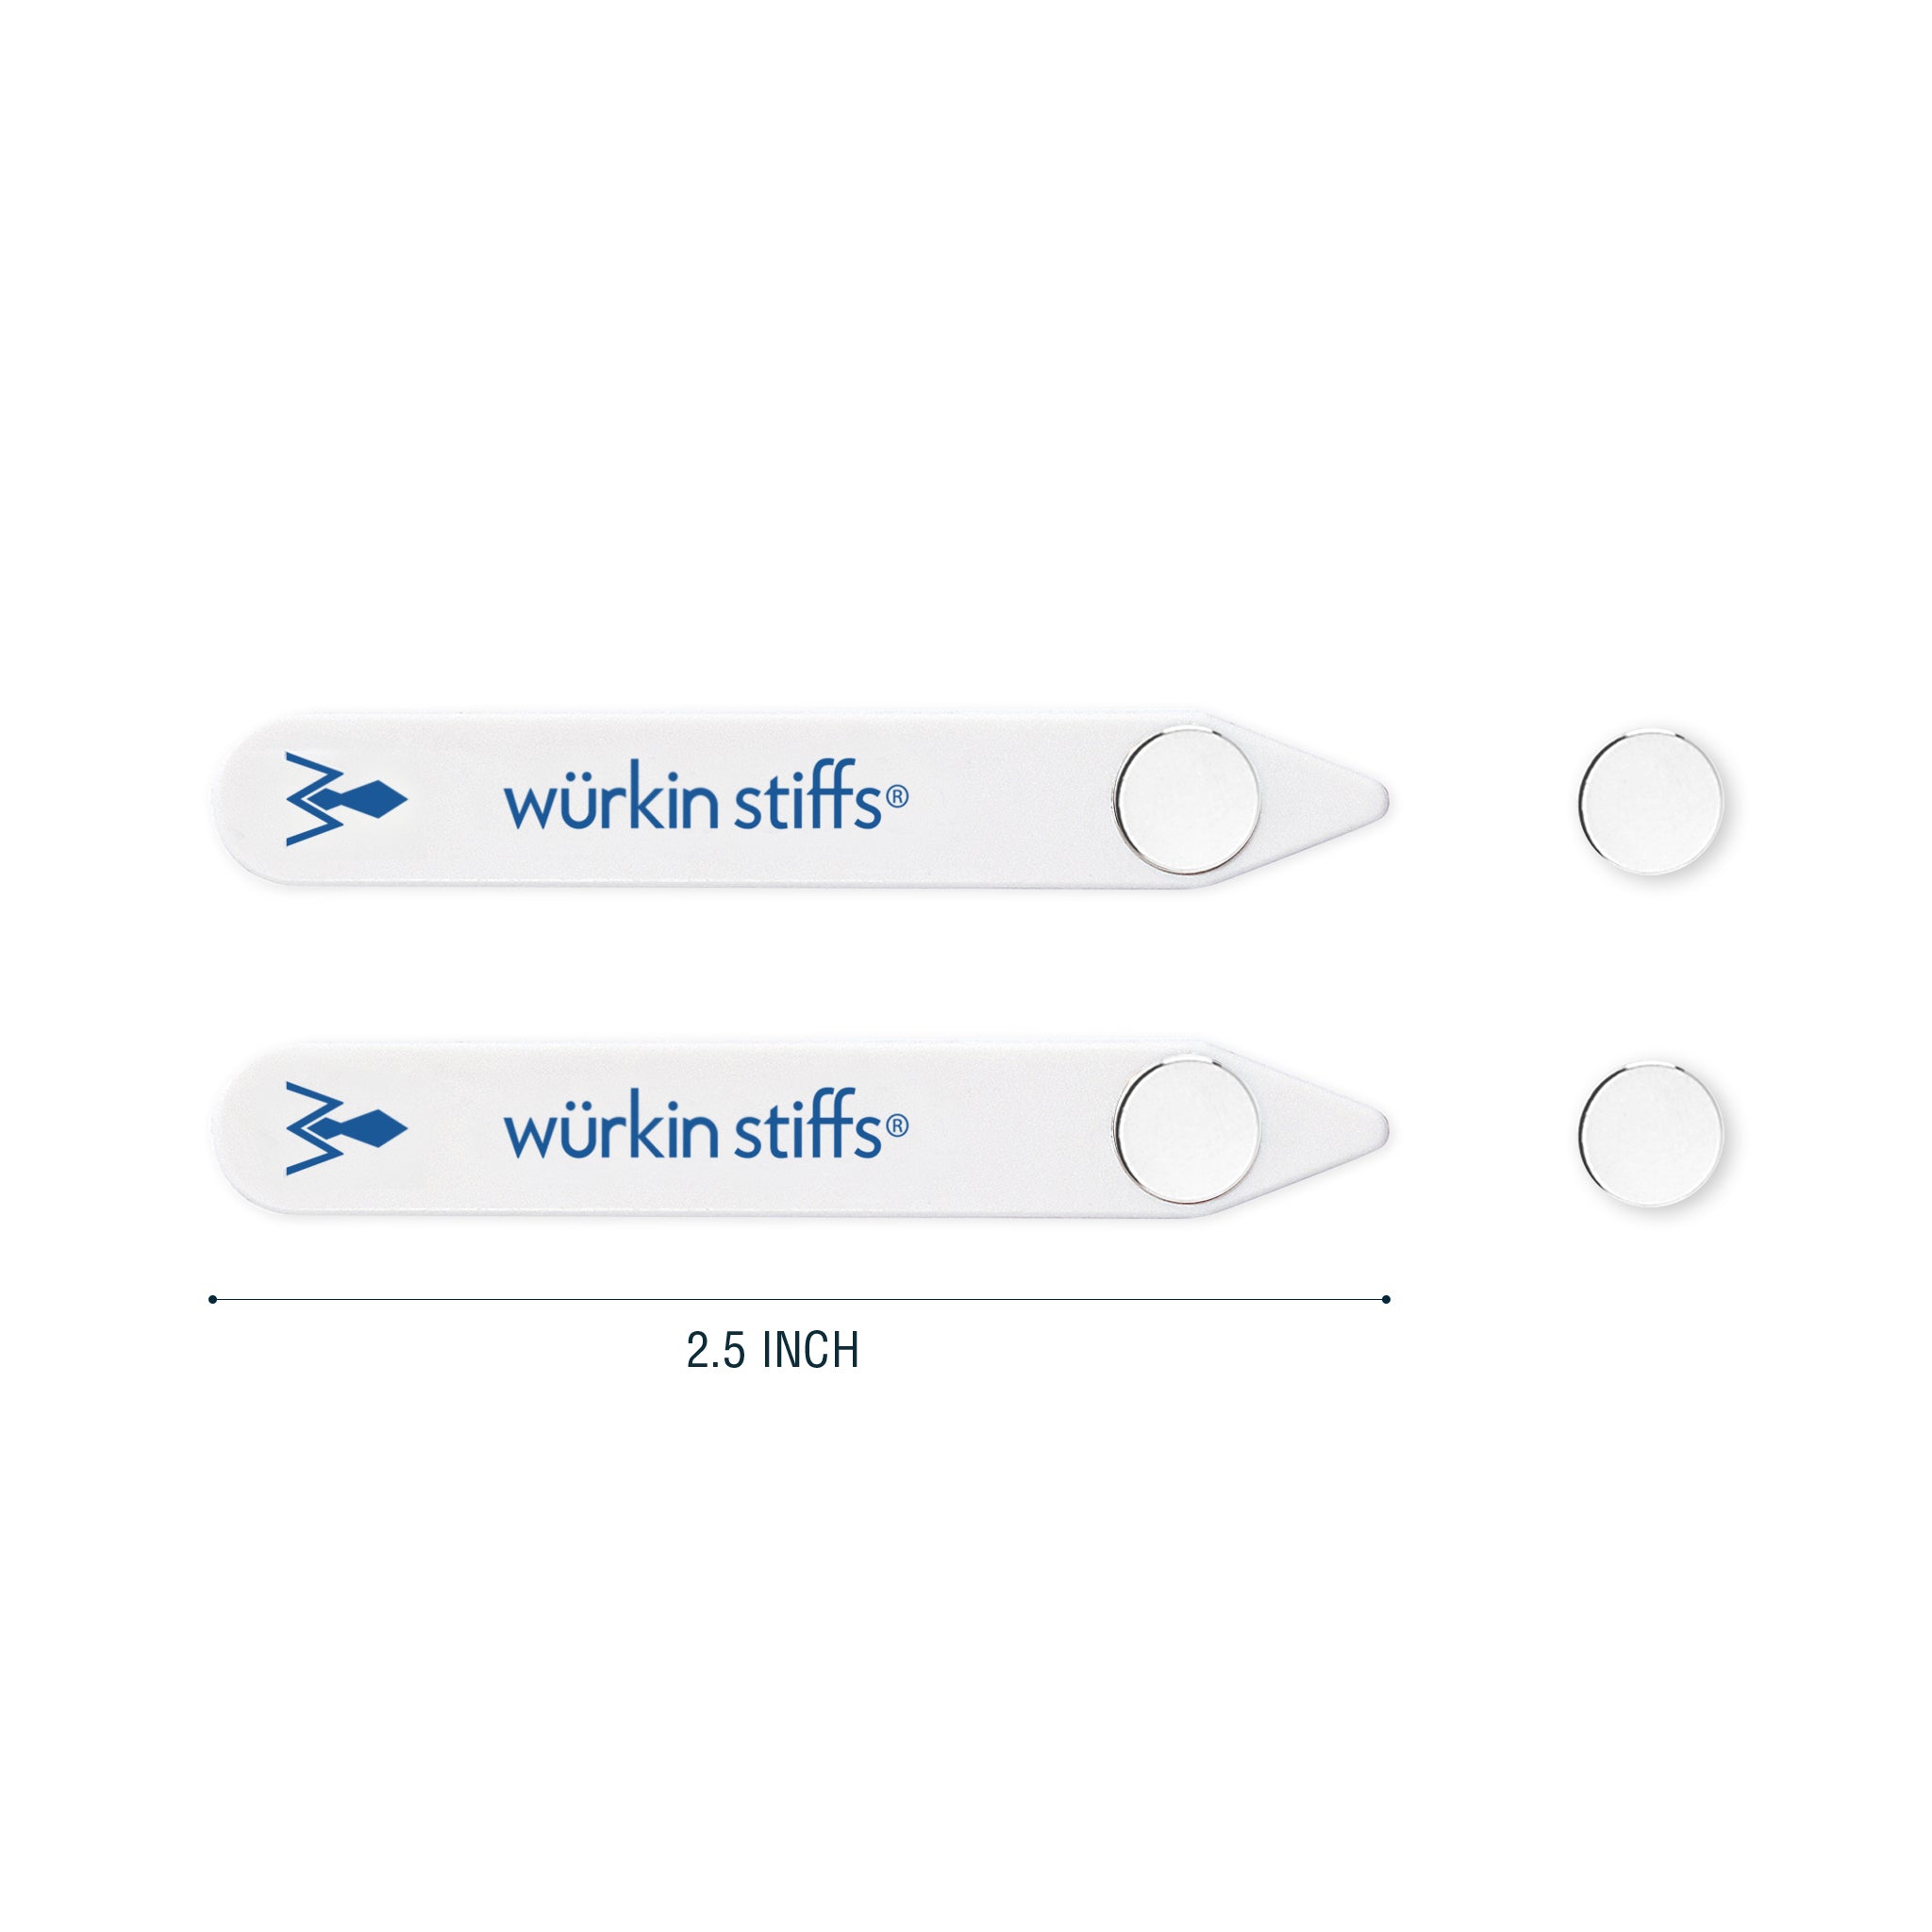  2.0-inch and 2.5-inch Power Stays Magnetic Collar Stays by  Würkin Stiffs, 1 Pair of Each Size, Includes (2) 2.0” Power Stays and (2)  2.5” Power Stays with Storage Case